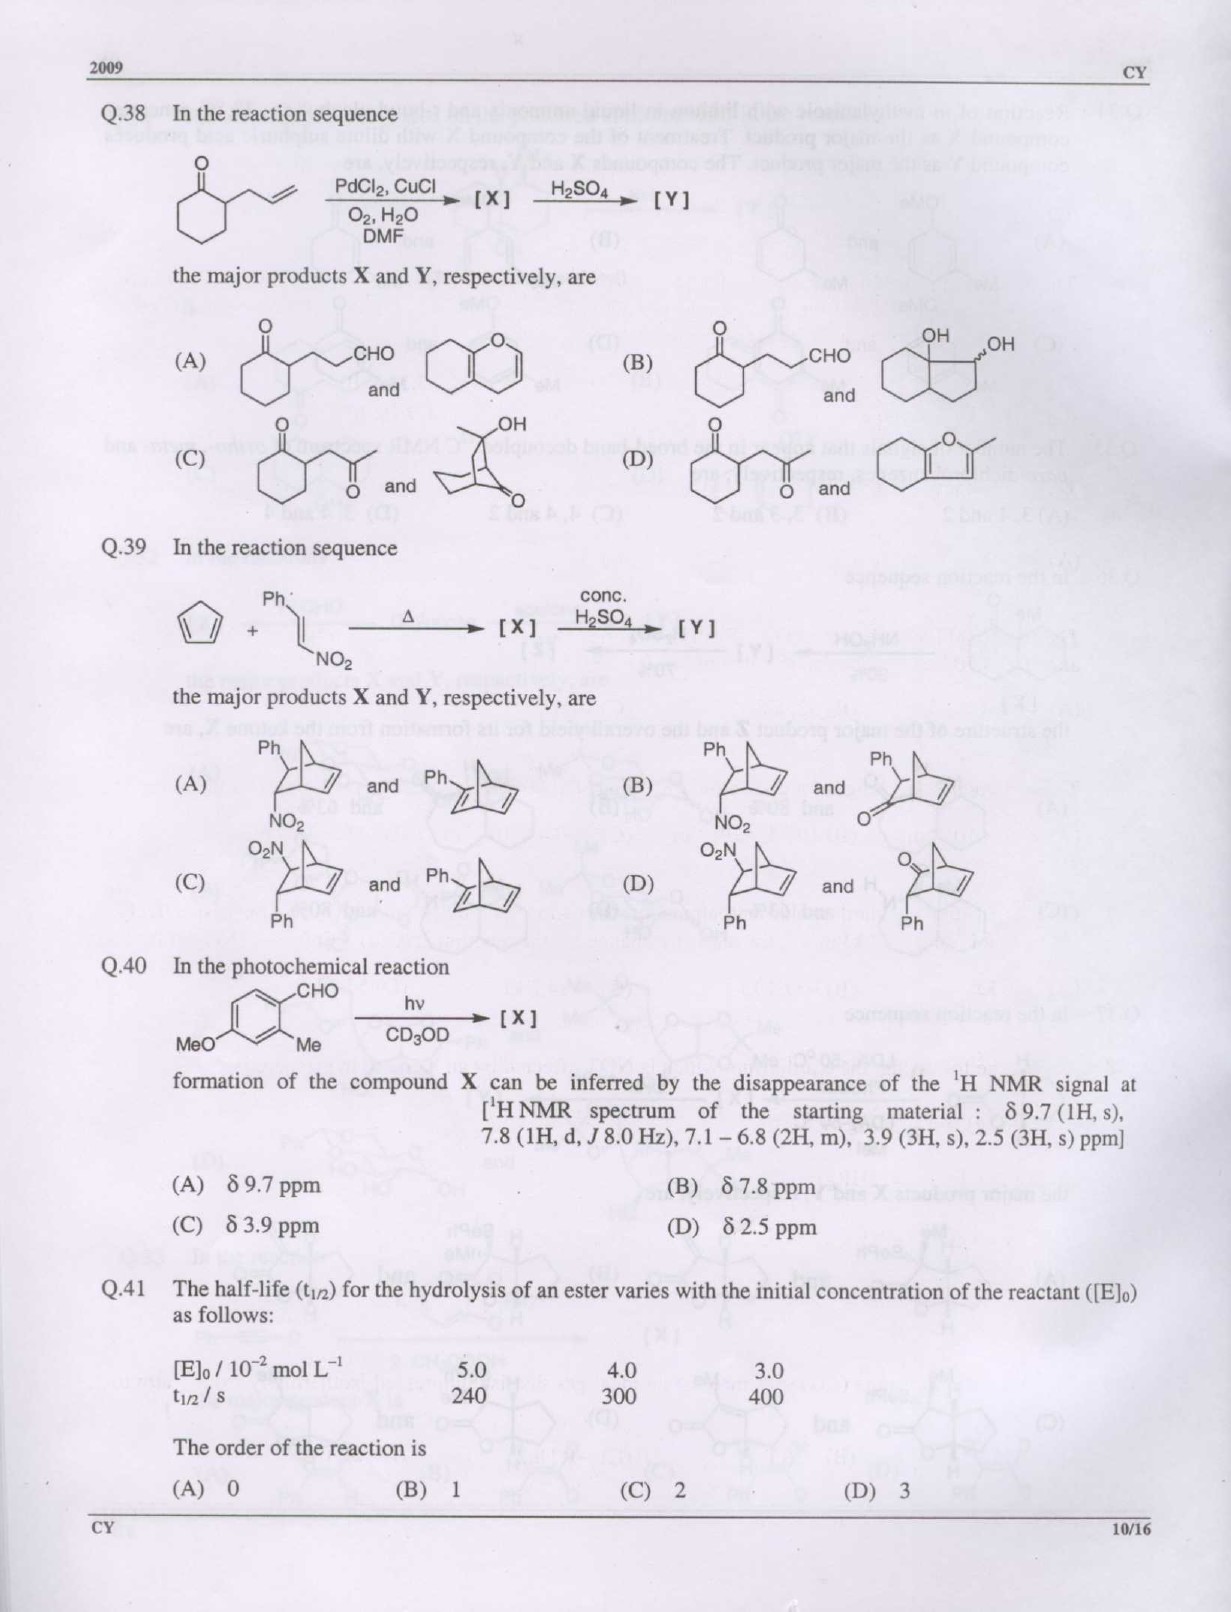 GATE Exam Question Paper 2009 Chemistry 10